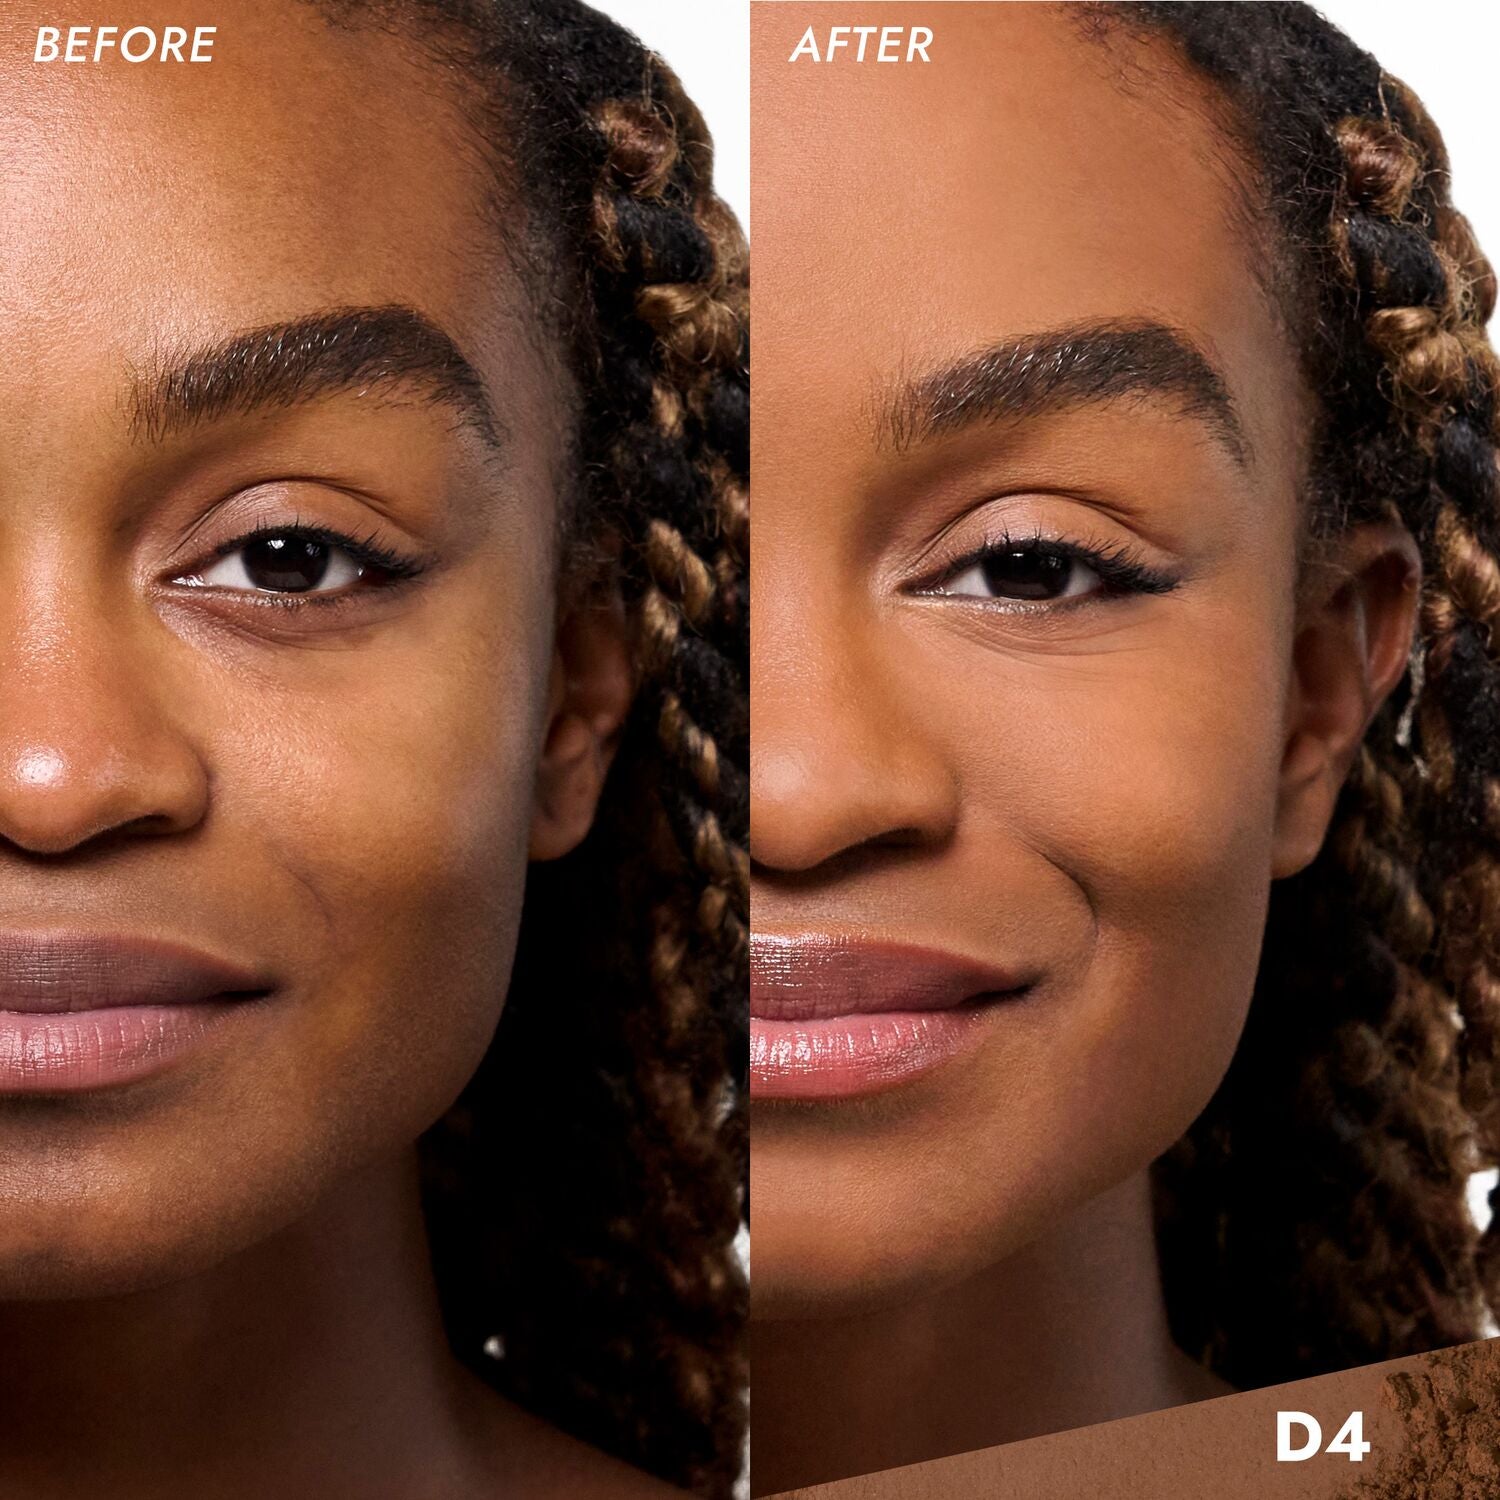 Coverfx Pressed Mineral Foundation model before and after image in shade  D4